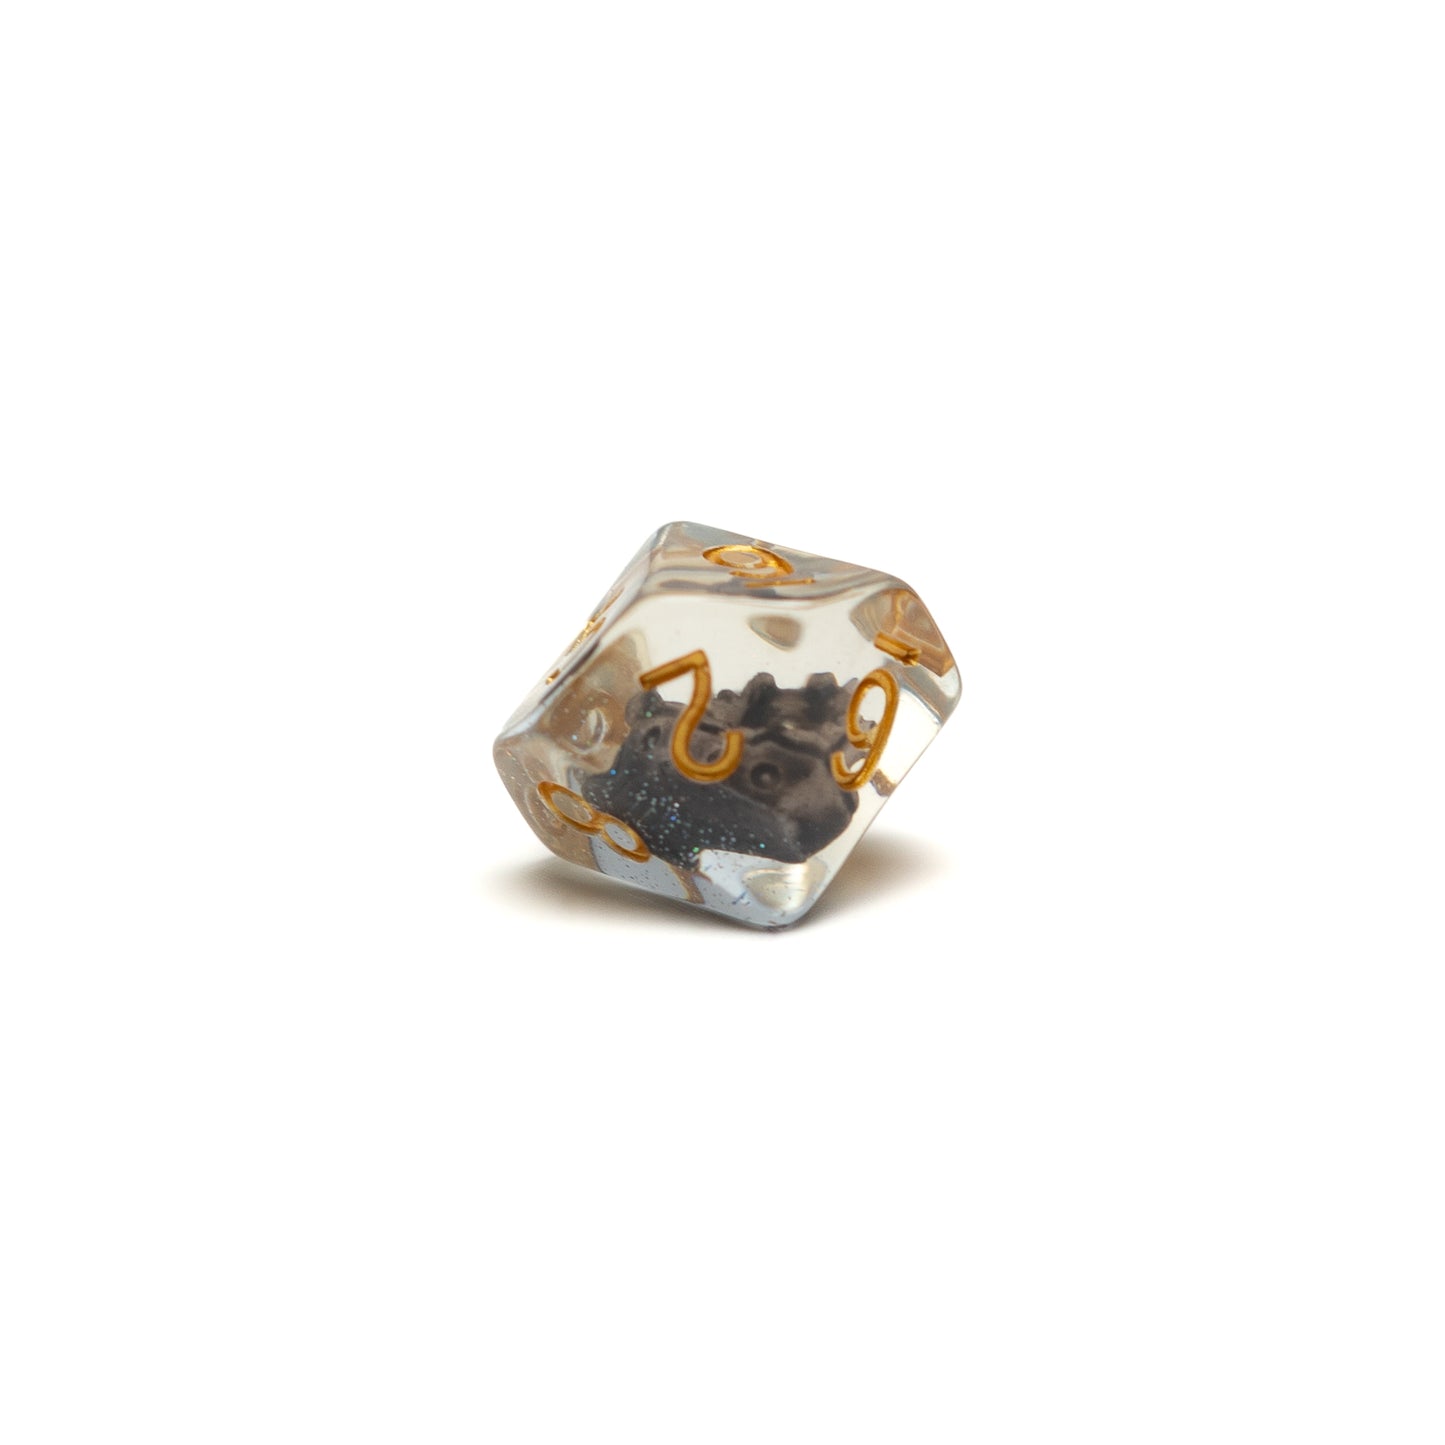 Roll Britannia Captain Timbers Dungeons and Dragons D10 acrylic dice with ship and ocean inside